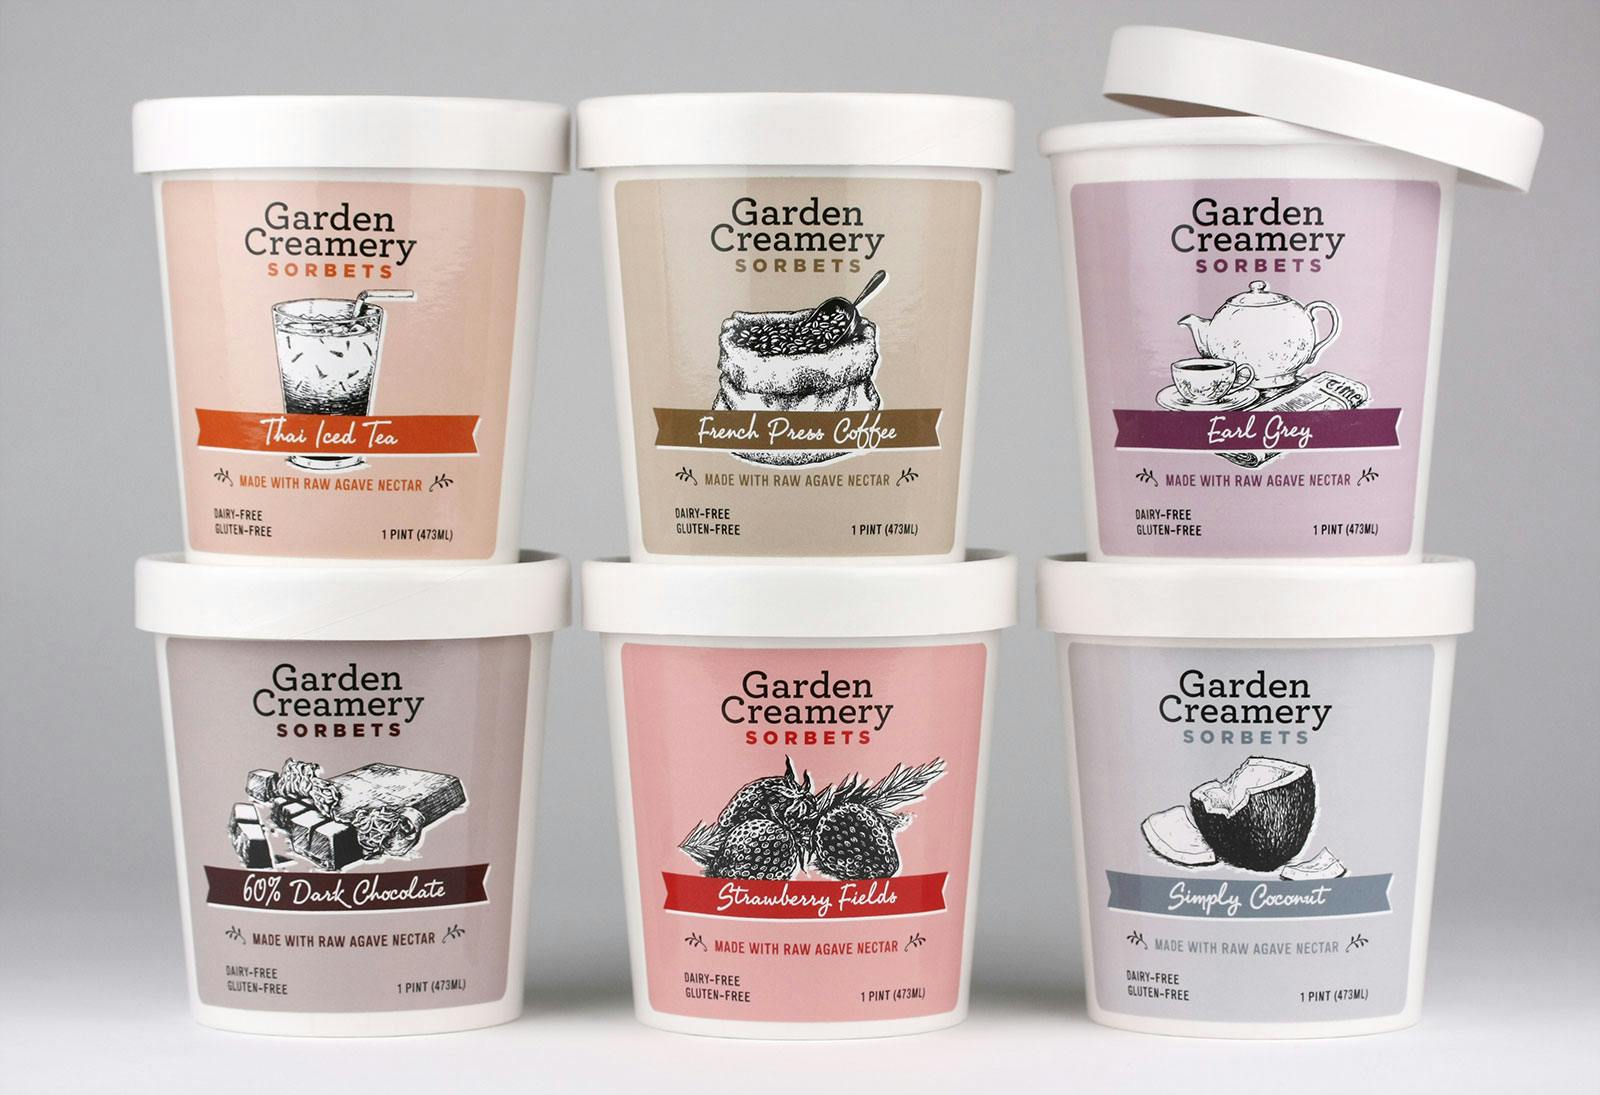 Garden Creamery Sorbets packaging in various flavours designed by Makewell.